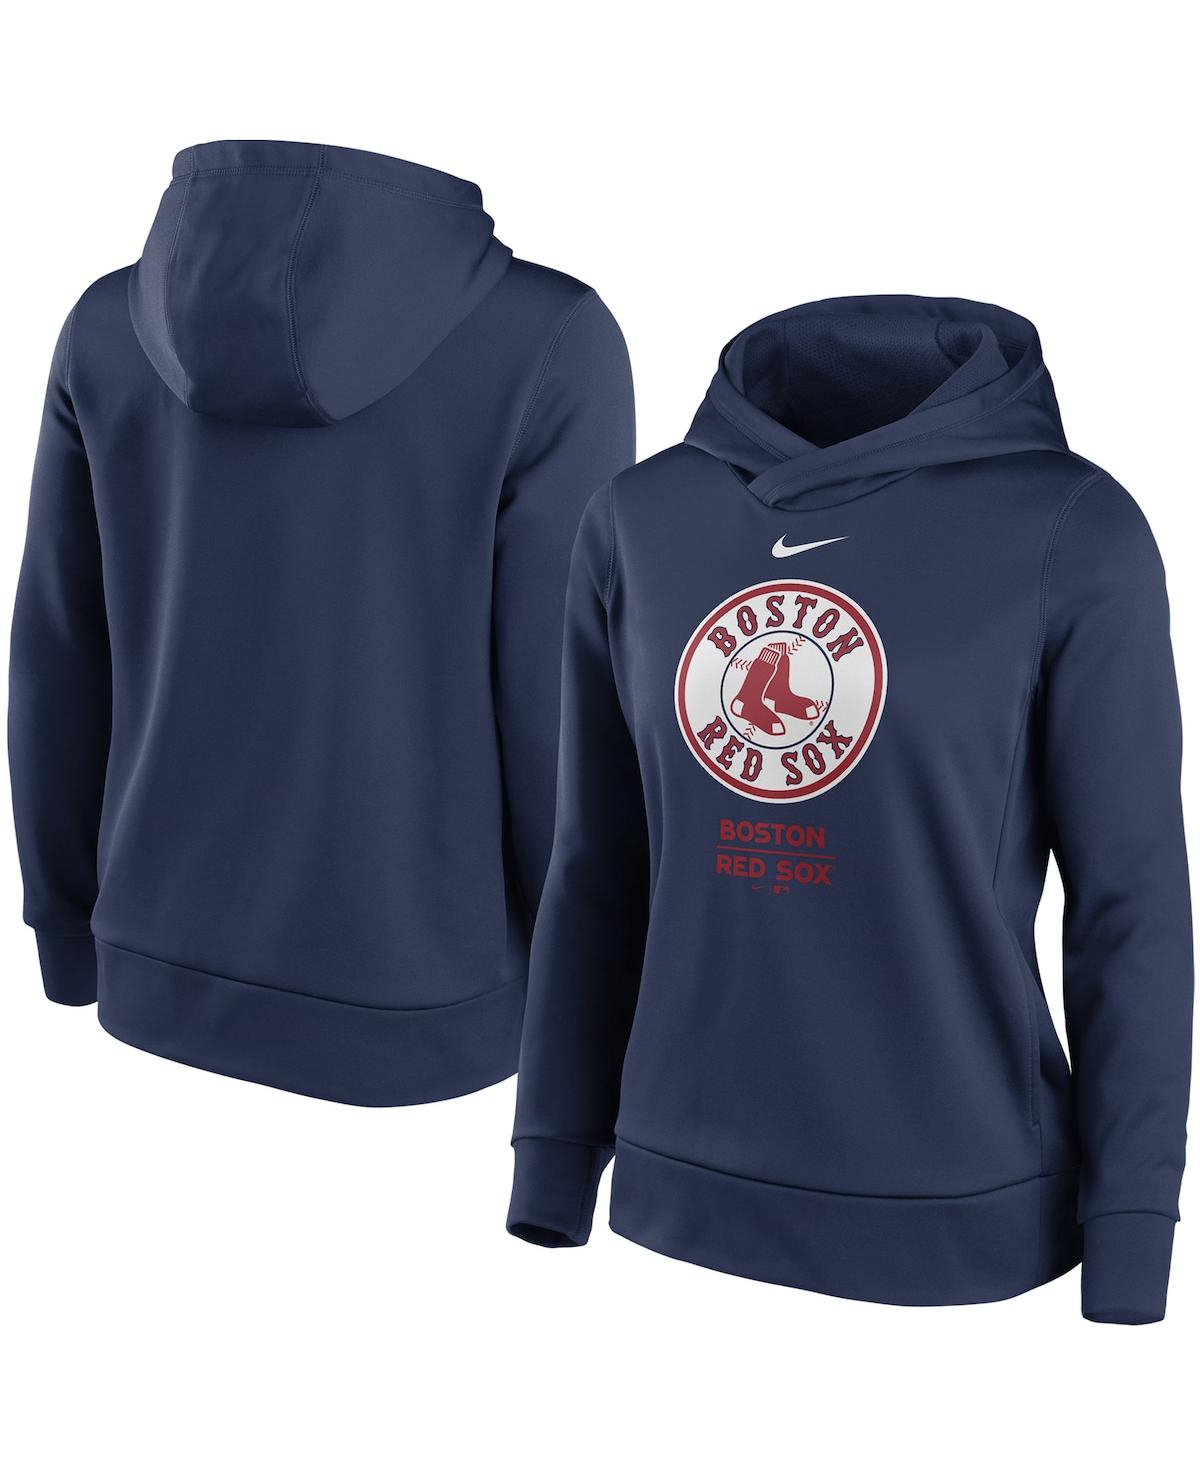 Youth Boston Red Sox Nike Navy Rewind Lefty Pullover Hoodie